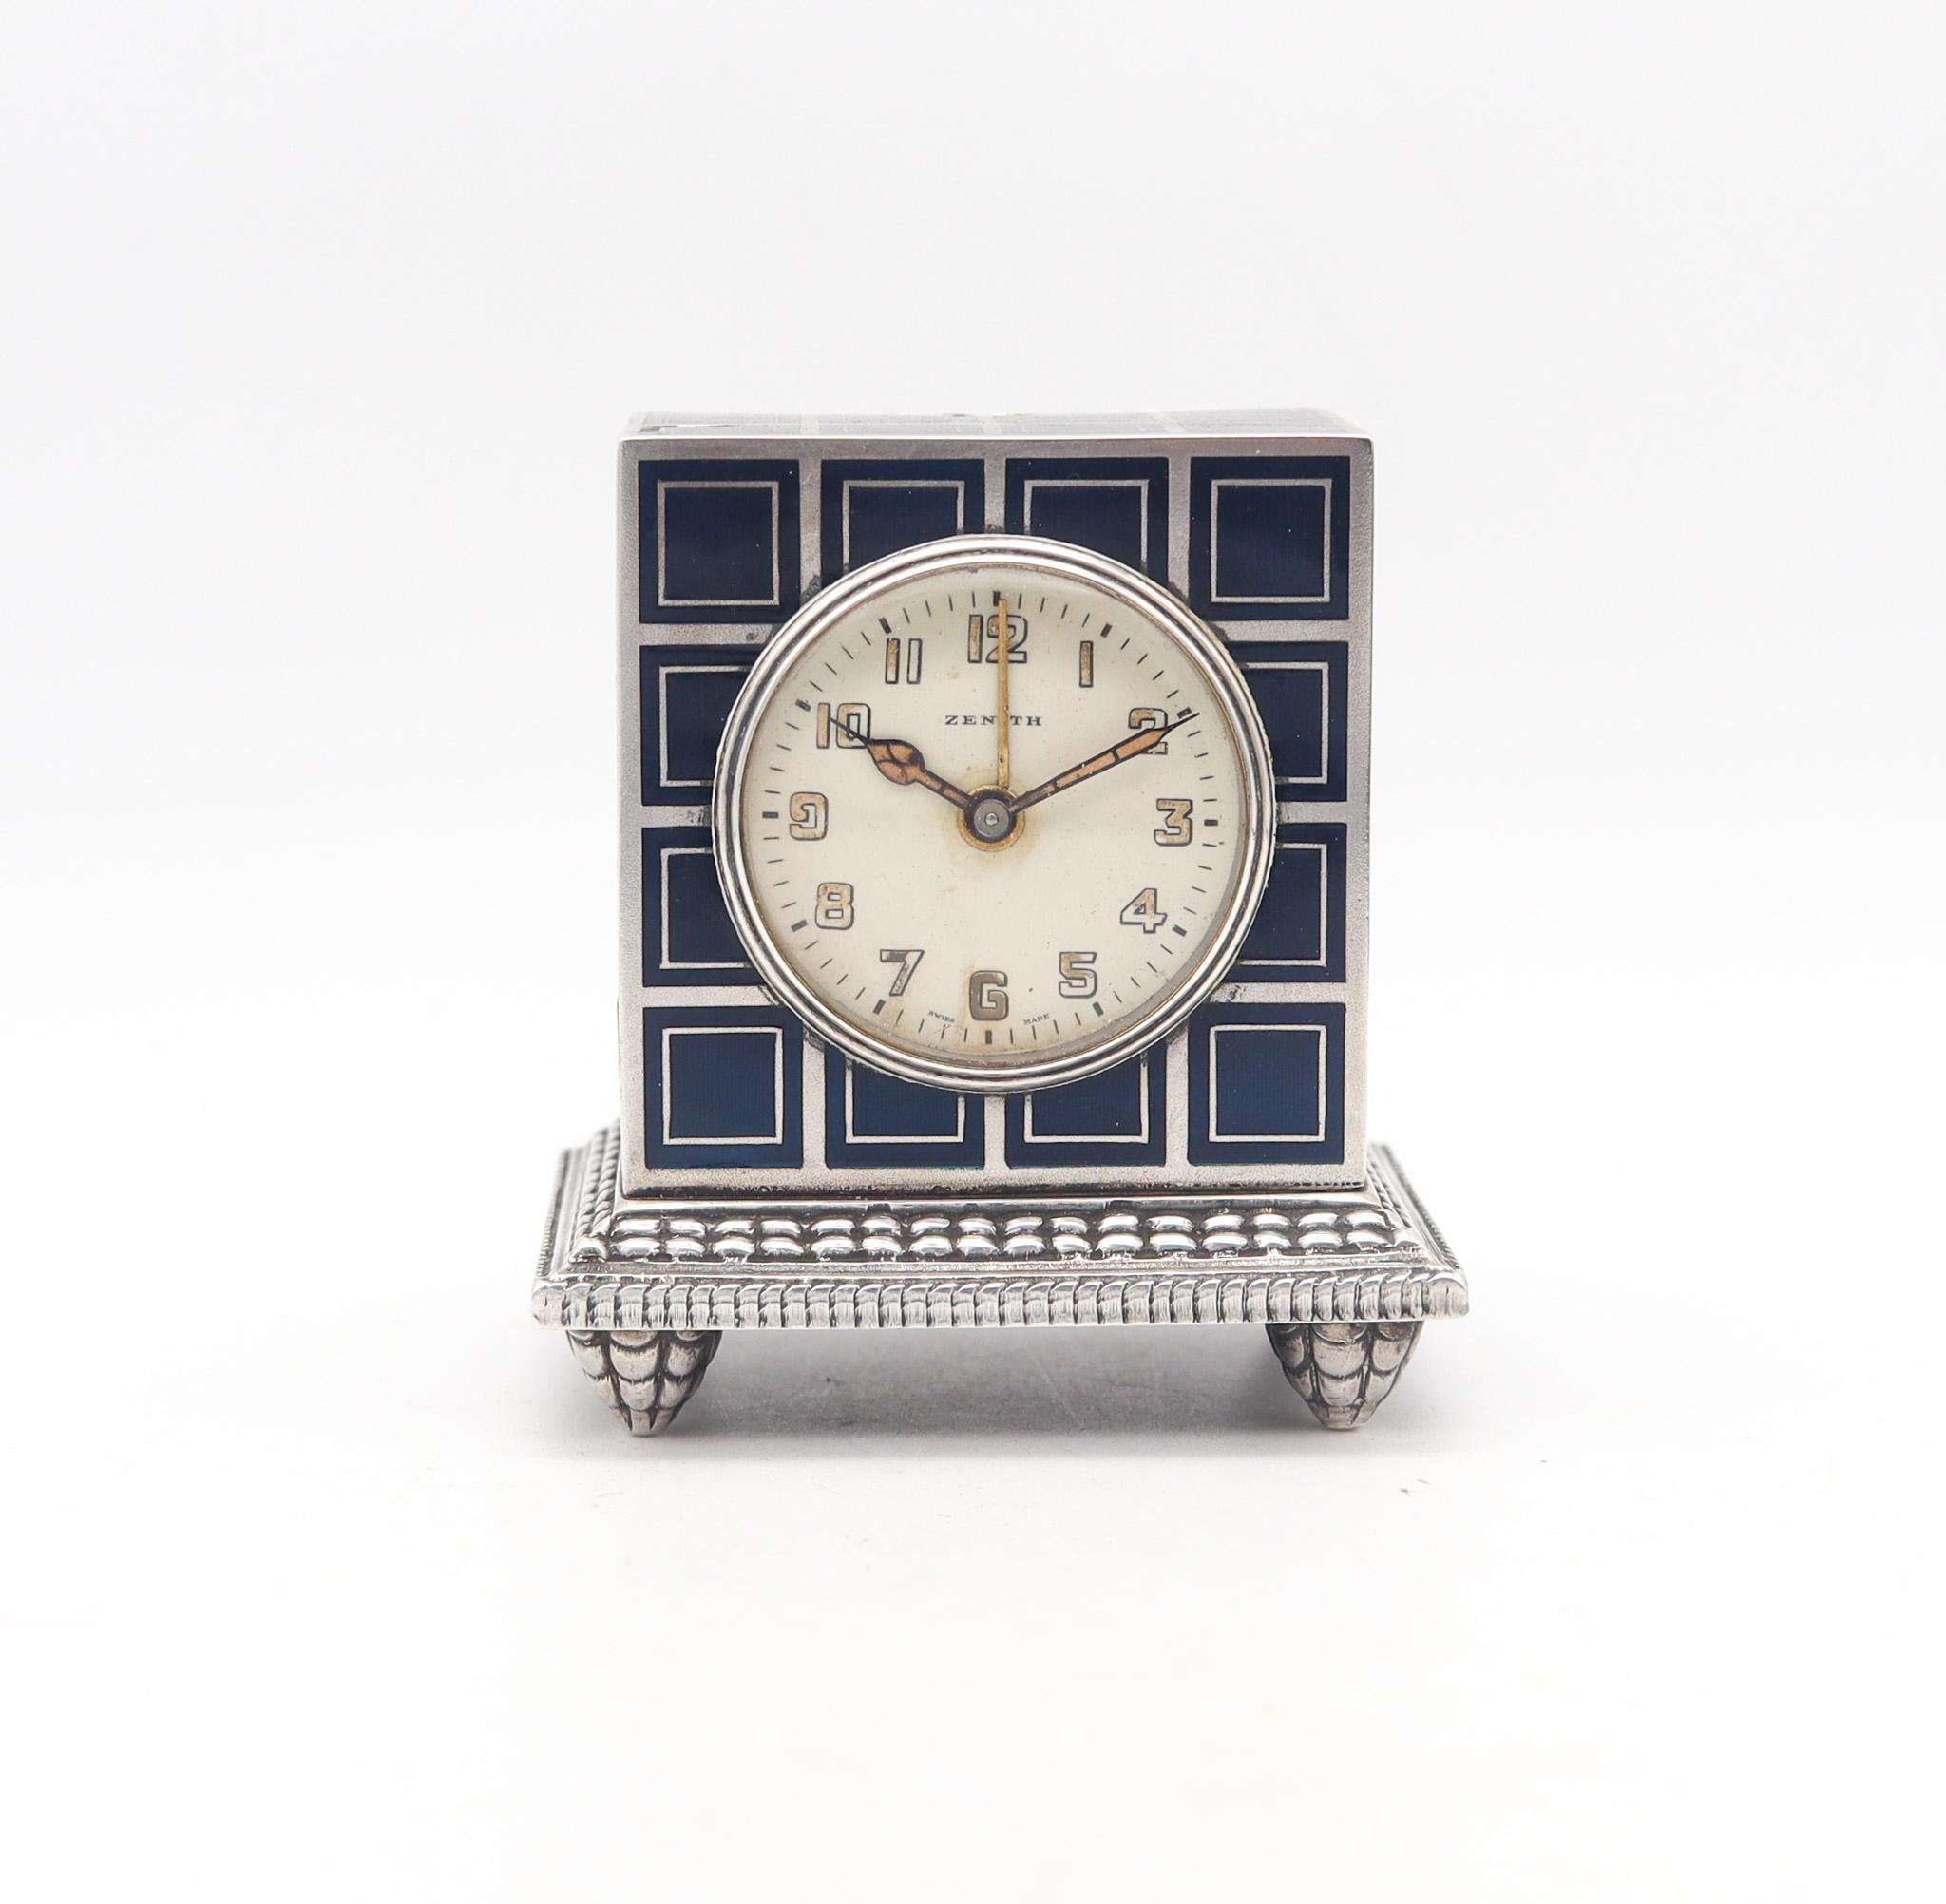 A miniature travel alarm clock designed by Zenith.

This is a gorgeous travel-carriage miniature alarm clock, made in Geneva Switzerland by the company Zenith This antique little clock is exceptional and was created during the art deco period, back